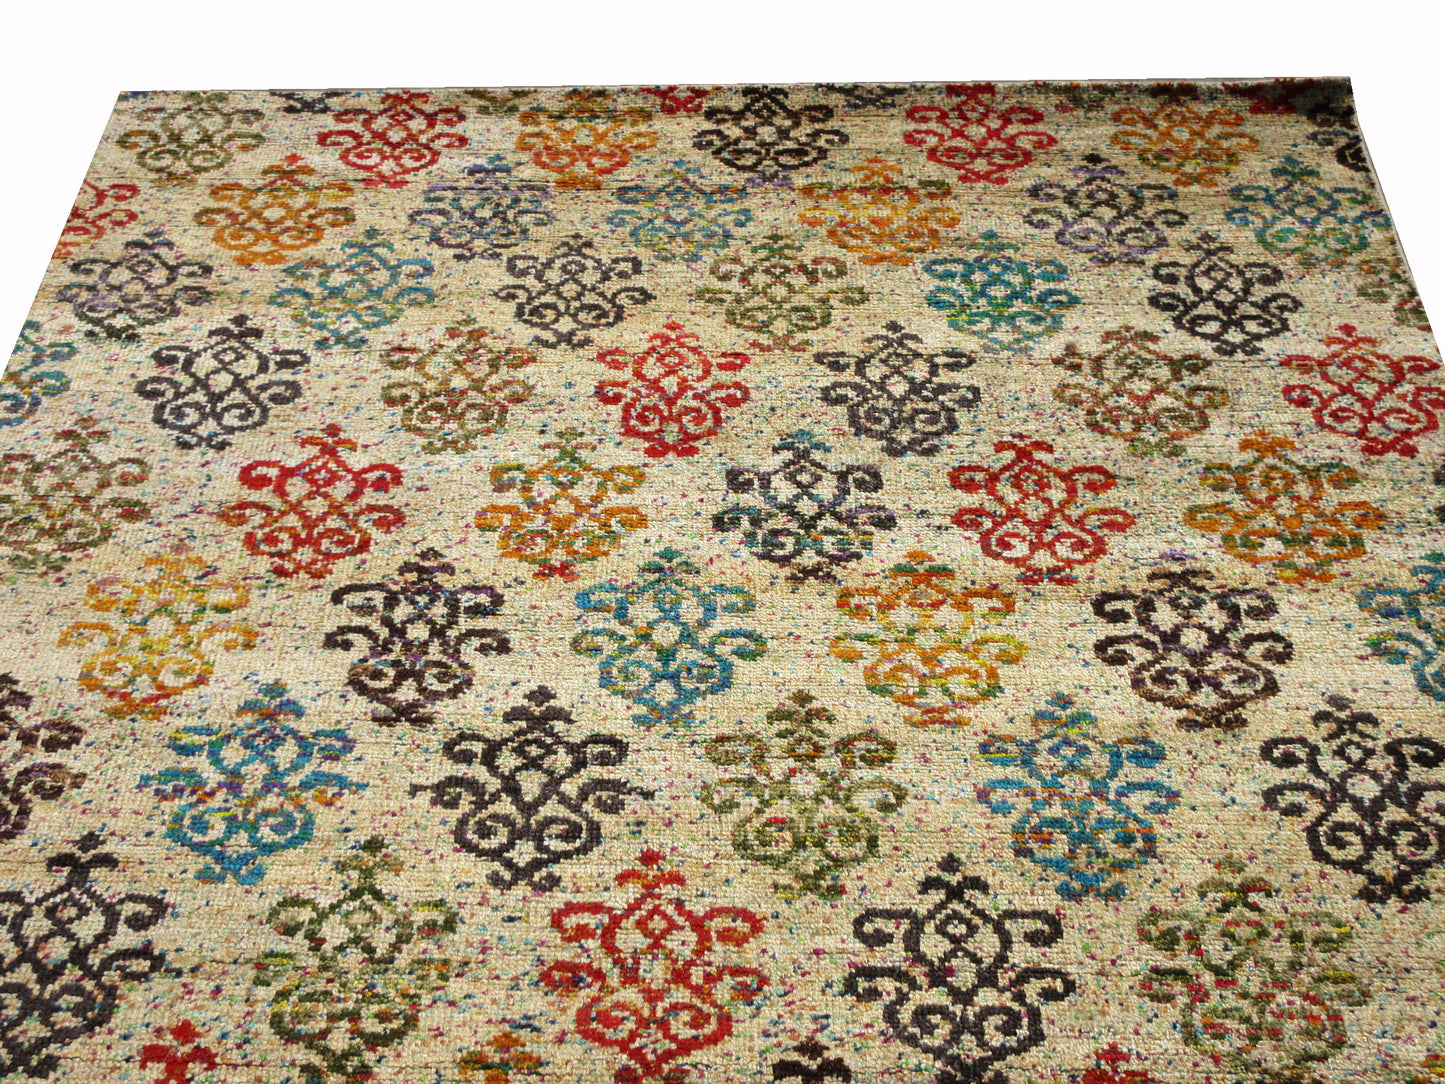 8X10 Modern Multicolored Hand-Knotted Silk Rug